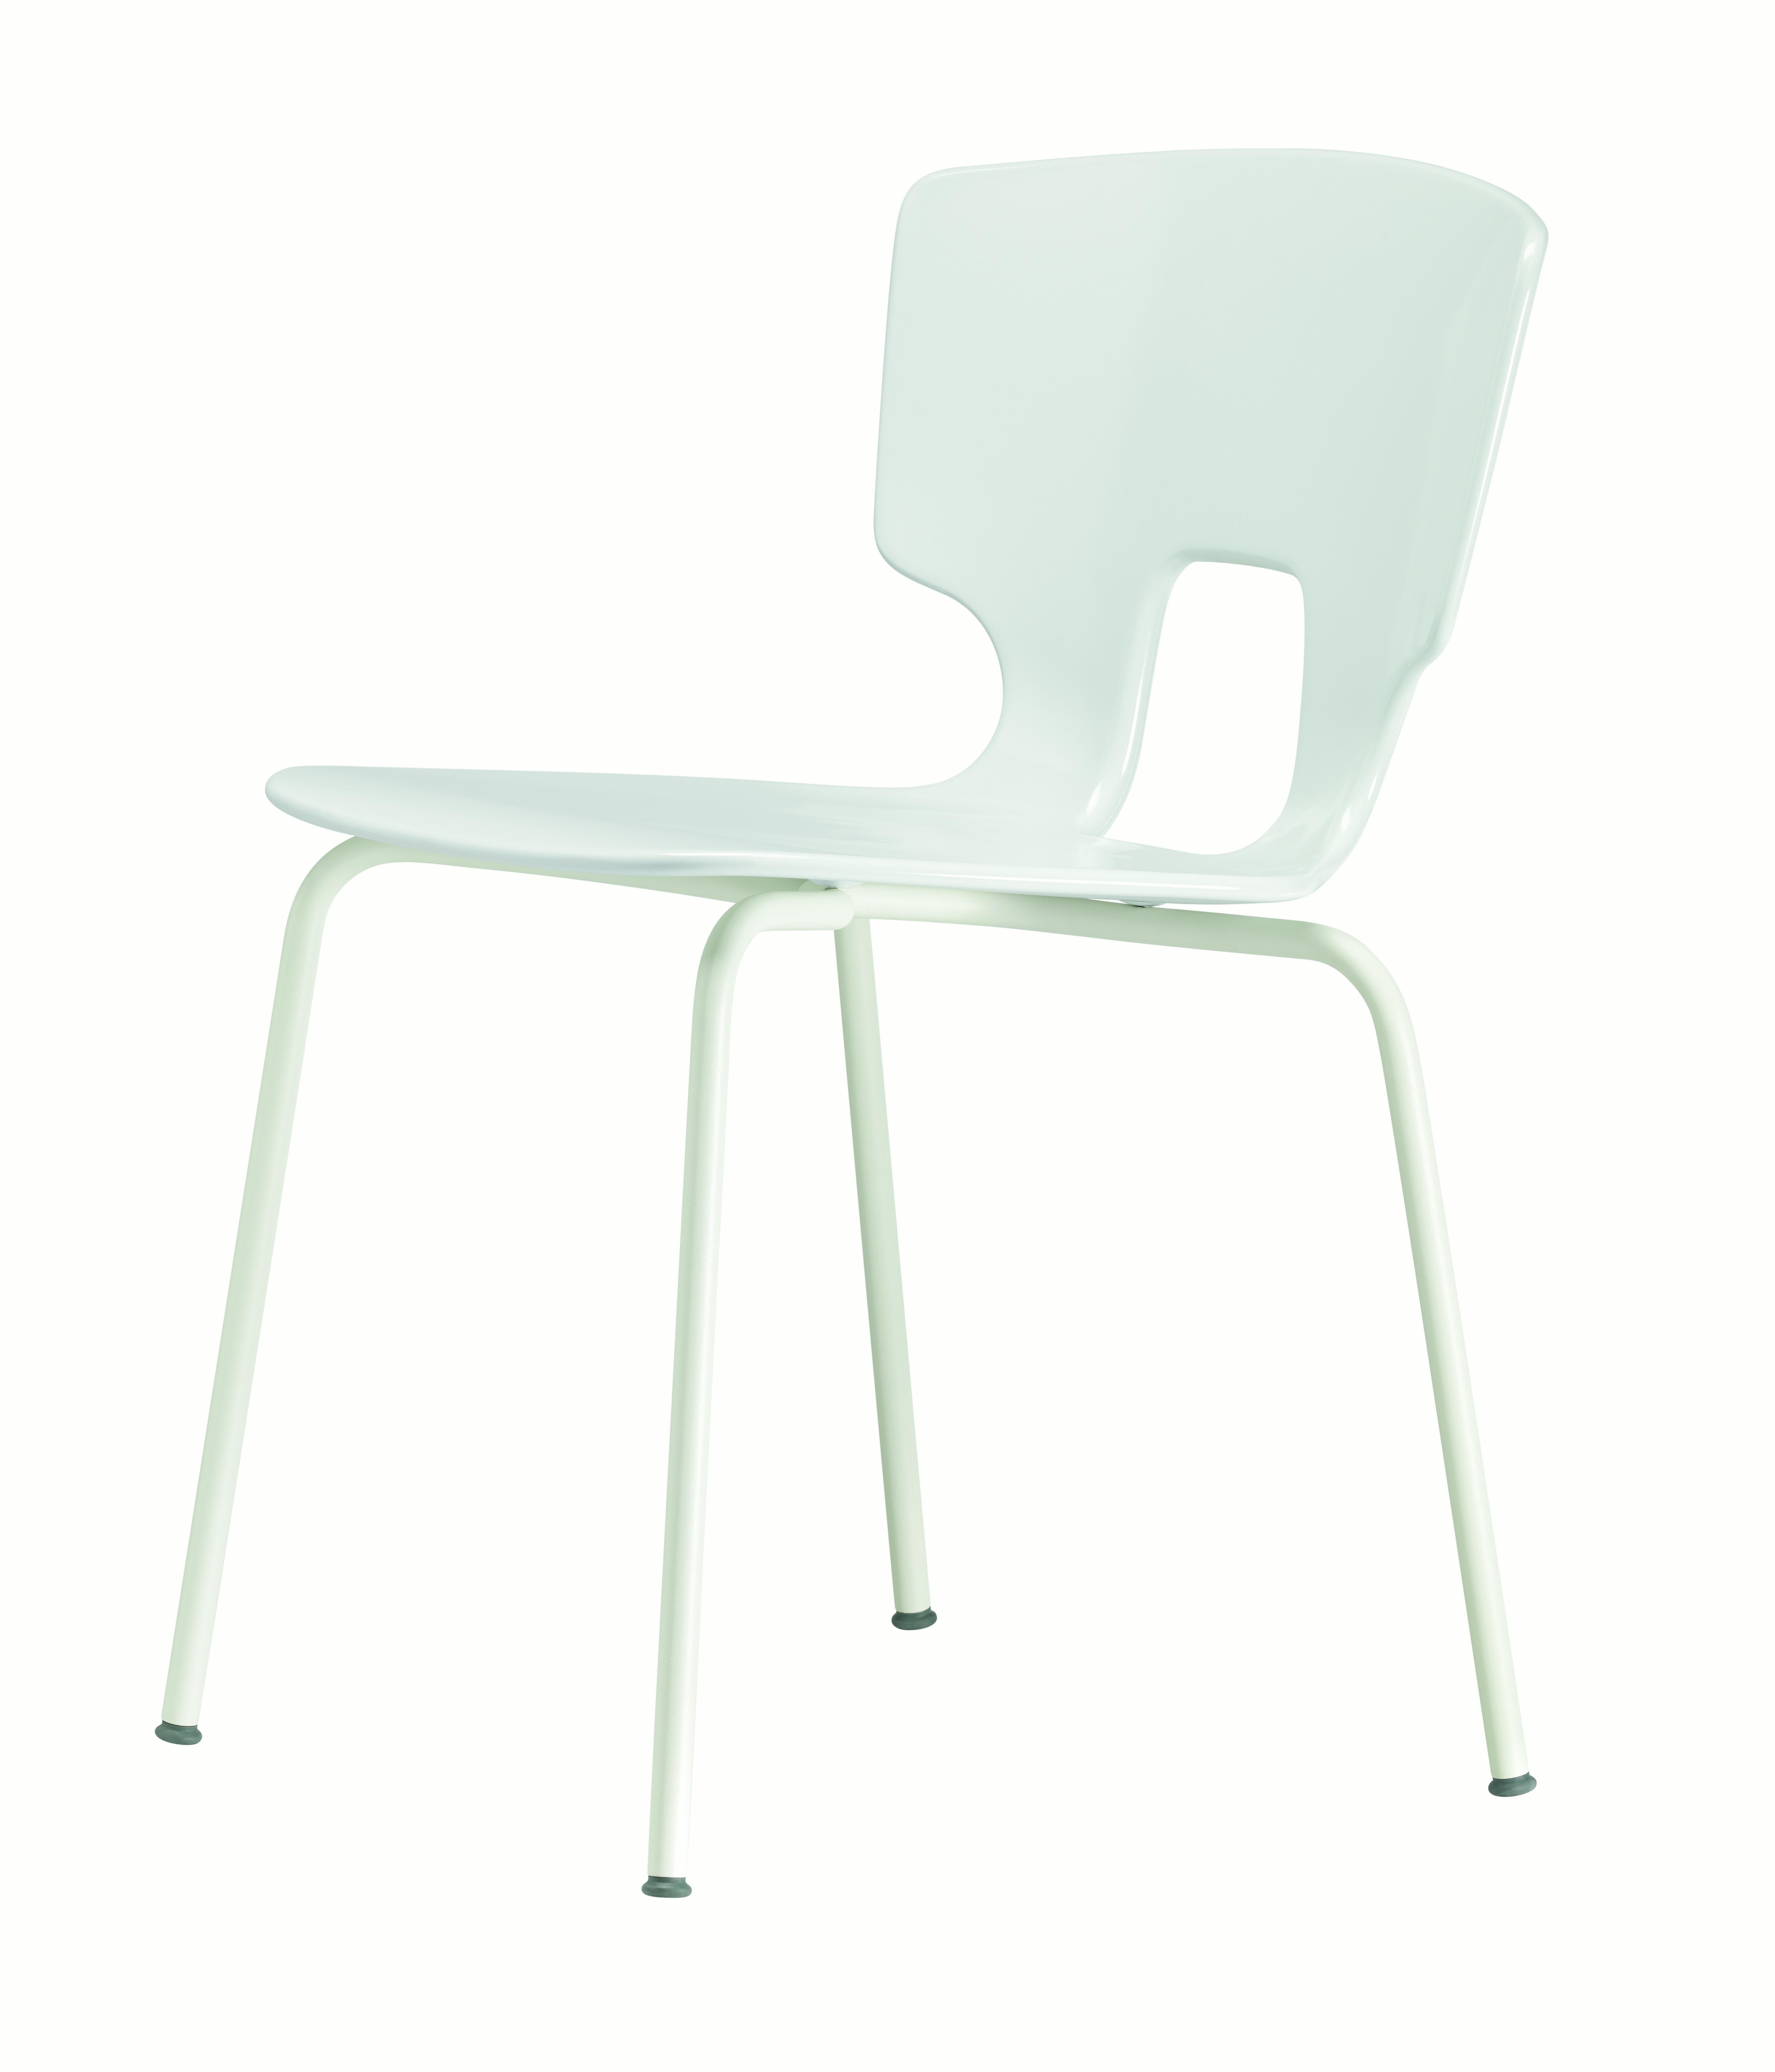 Alias 50A Erice Chair in White Lacquered Steel Frame by Alfredo Häberli

Stacking chair with structure in lacquered or chromed steel; seat and back in solid plastic material.

Born in Lenno Tremezzina (Como), in 1945, he graduated in mechanical